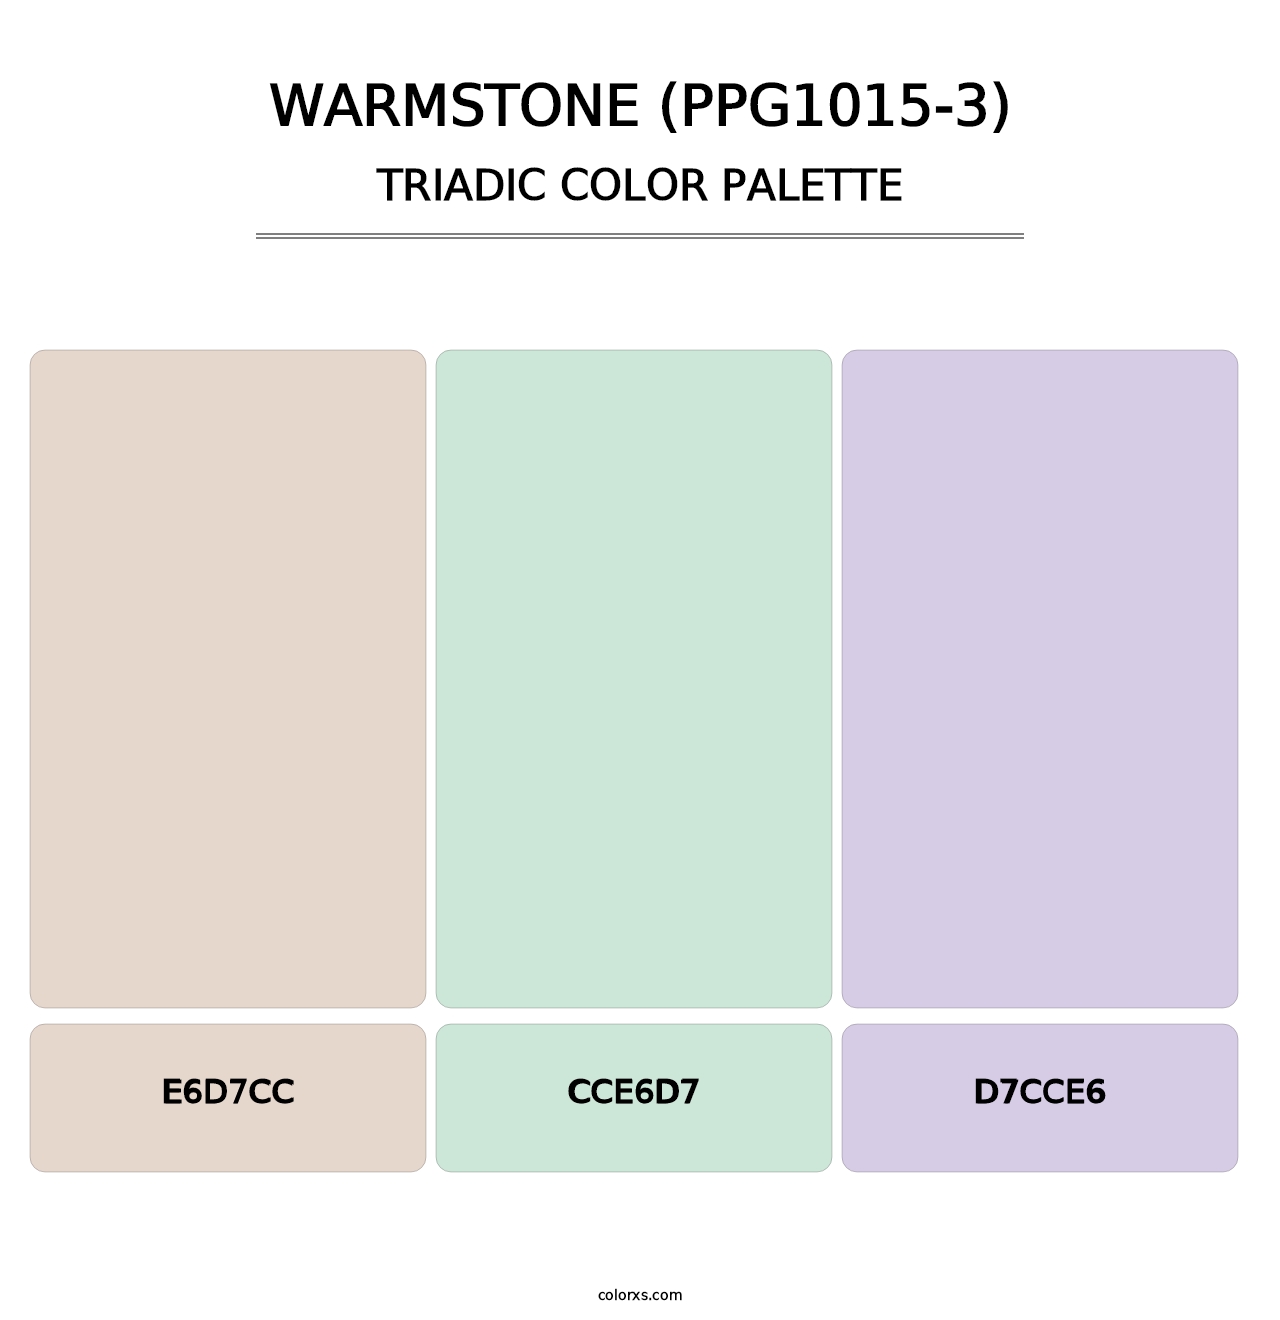 Warmstone (PPG1015-3) - Triadic Color Palette